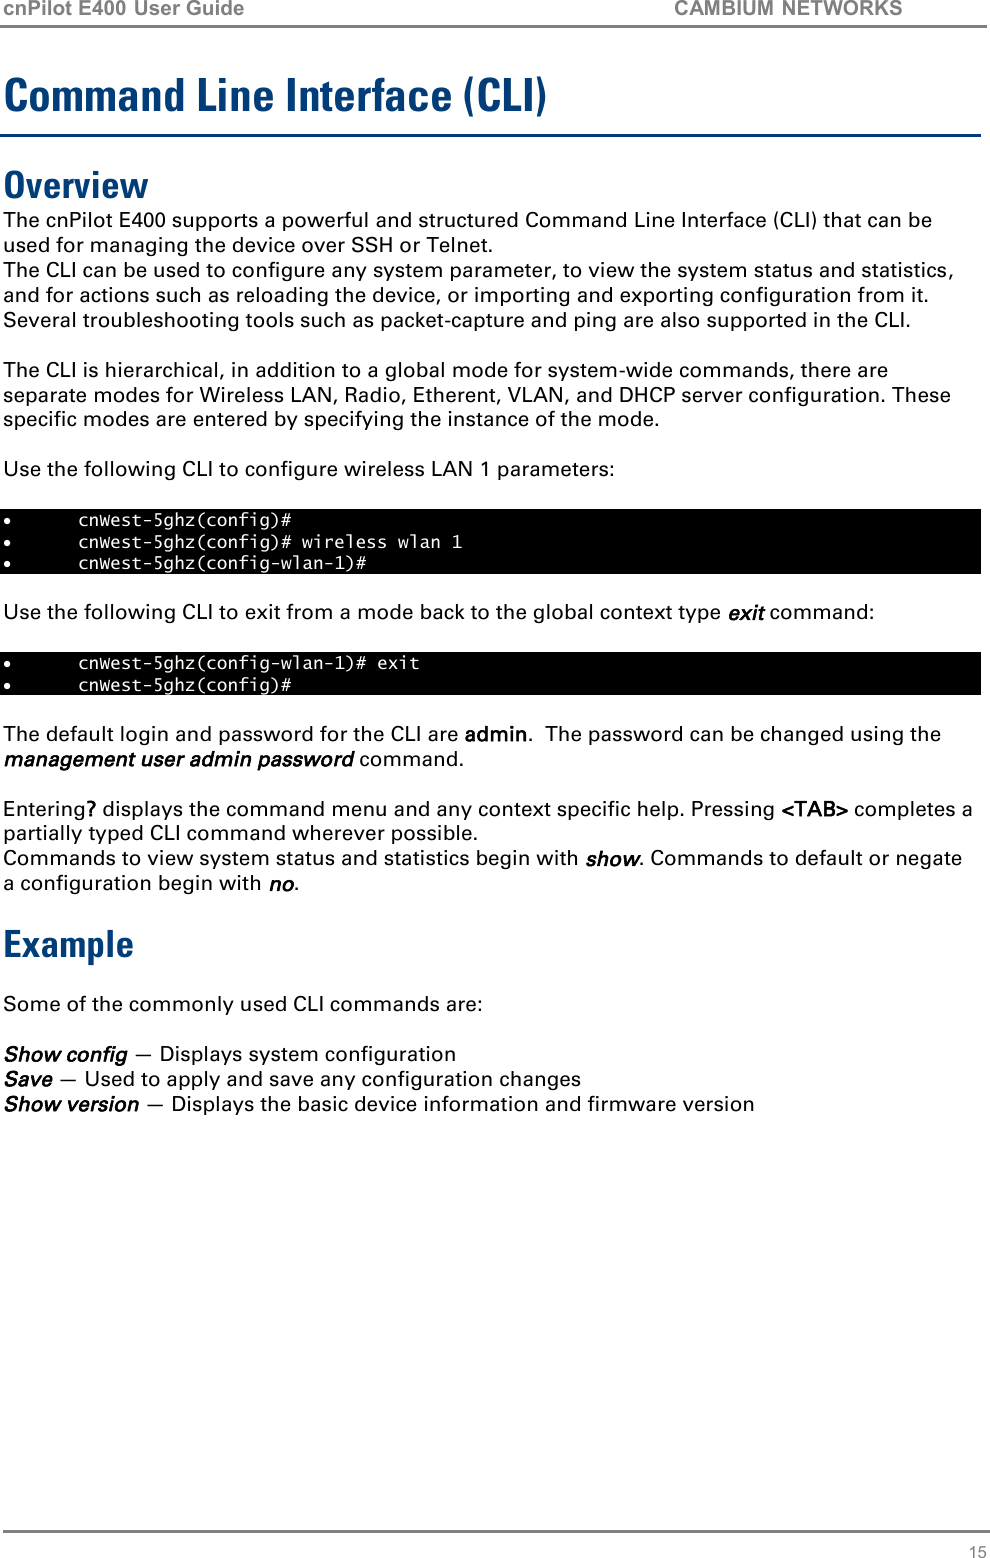 cnPilot E400 User Guide           CAMBIUM NETWORKS   15 Command Line Interface (CLI) Overview The cnPilot E400 supports a powerful and structured Command Line Interface (CLI) that can be used for managing the device over SSH or Telnet. The CLI can be used to configure any system parameter, to view the system status and statistics, and for actions such as reloading the device, or importing and exporting configuration from it. Several troubleshooting tools such as packet-capture and ping are also supported in the CLI.  The CLI is hierarchical, in addition to a global mode for system-wide commands, there are separate modes for Wireless LAN, Radio, Etherent, VLAN, and DHCP server configuration. These specific modes are entered by specifying the instance of the mode.   Use the following CLI to configure wireless LAN 1 parameters:   cnWest-5ghz(config)#   cnWest-5ghz(config)# wireless wlan 1  cnWest-5ghz(config-wlan-1)#   Use the following CLI to exit from a mode back to the global context type exit command:   cnWest-5ghz(config-wlan-1)# exit  cnWest-5ghz(config)#  The default login and password for the CLI are admin.  The password can be changed using the management user admin password command.  Entering? displays the command menu and any context specific help. Pressing &lt;TAB&gt; completes a partially typed CLI command wherever possible. Commands to view system status and statistics begin with show. Commands to default or negate a configuration begin with no.    Example  Some of the commonly used CLI commands are:  Show config — Displays system configuration Save — Used to apply and save any configuration changes Show version — Displays the basic device information and firmware version  